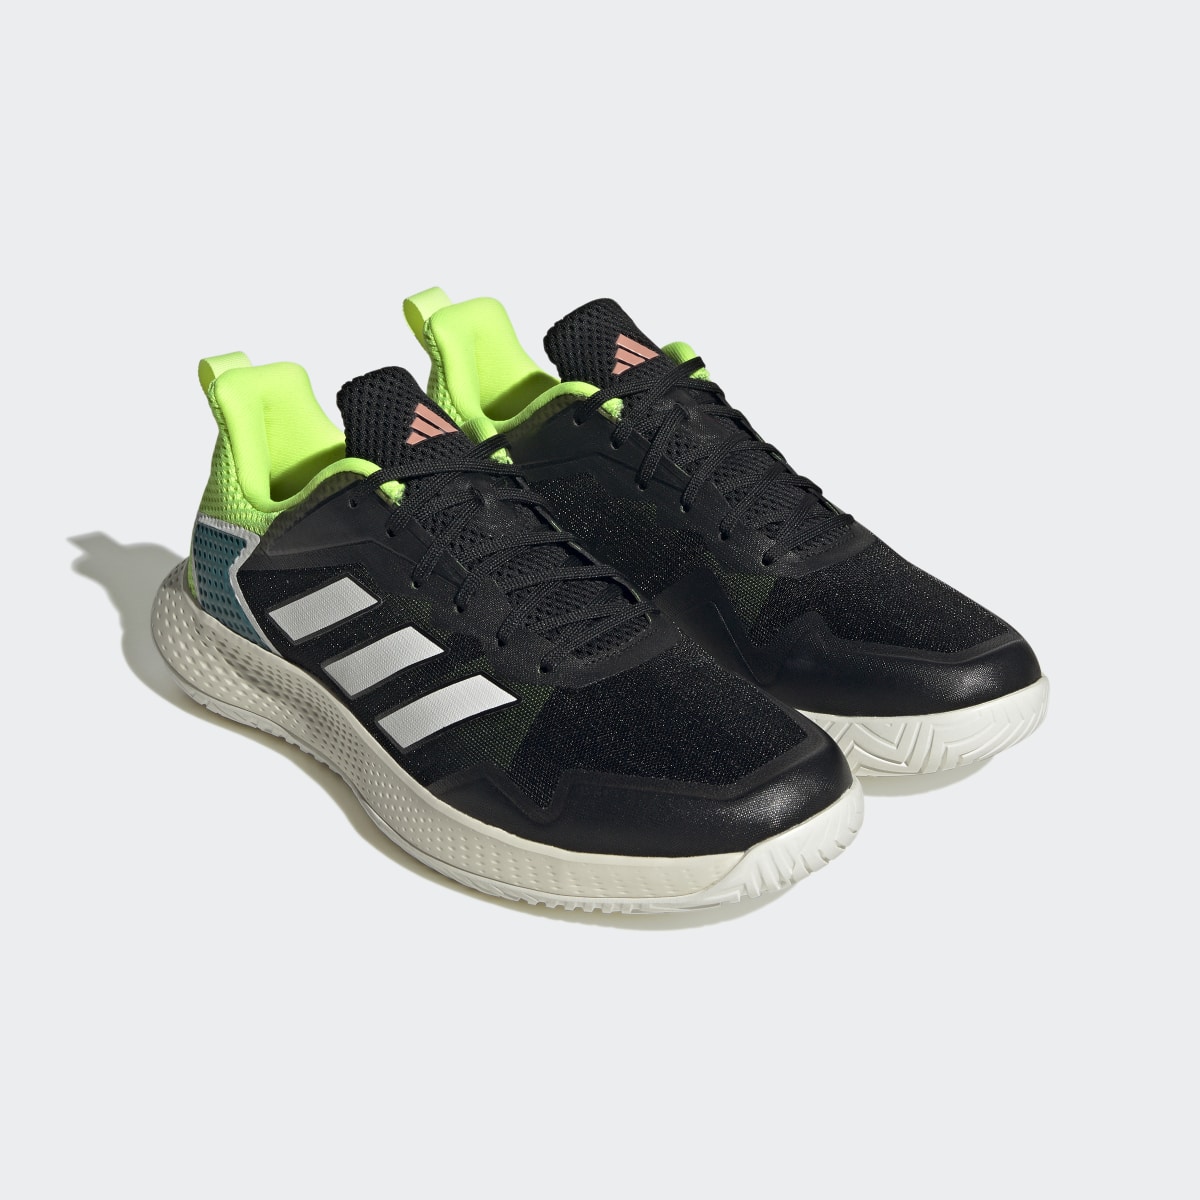 Adidas Defiant Speed Tennis Shoes. 5